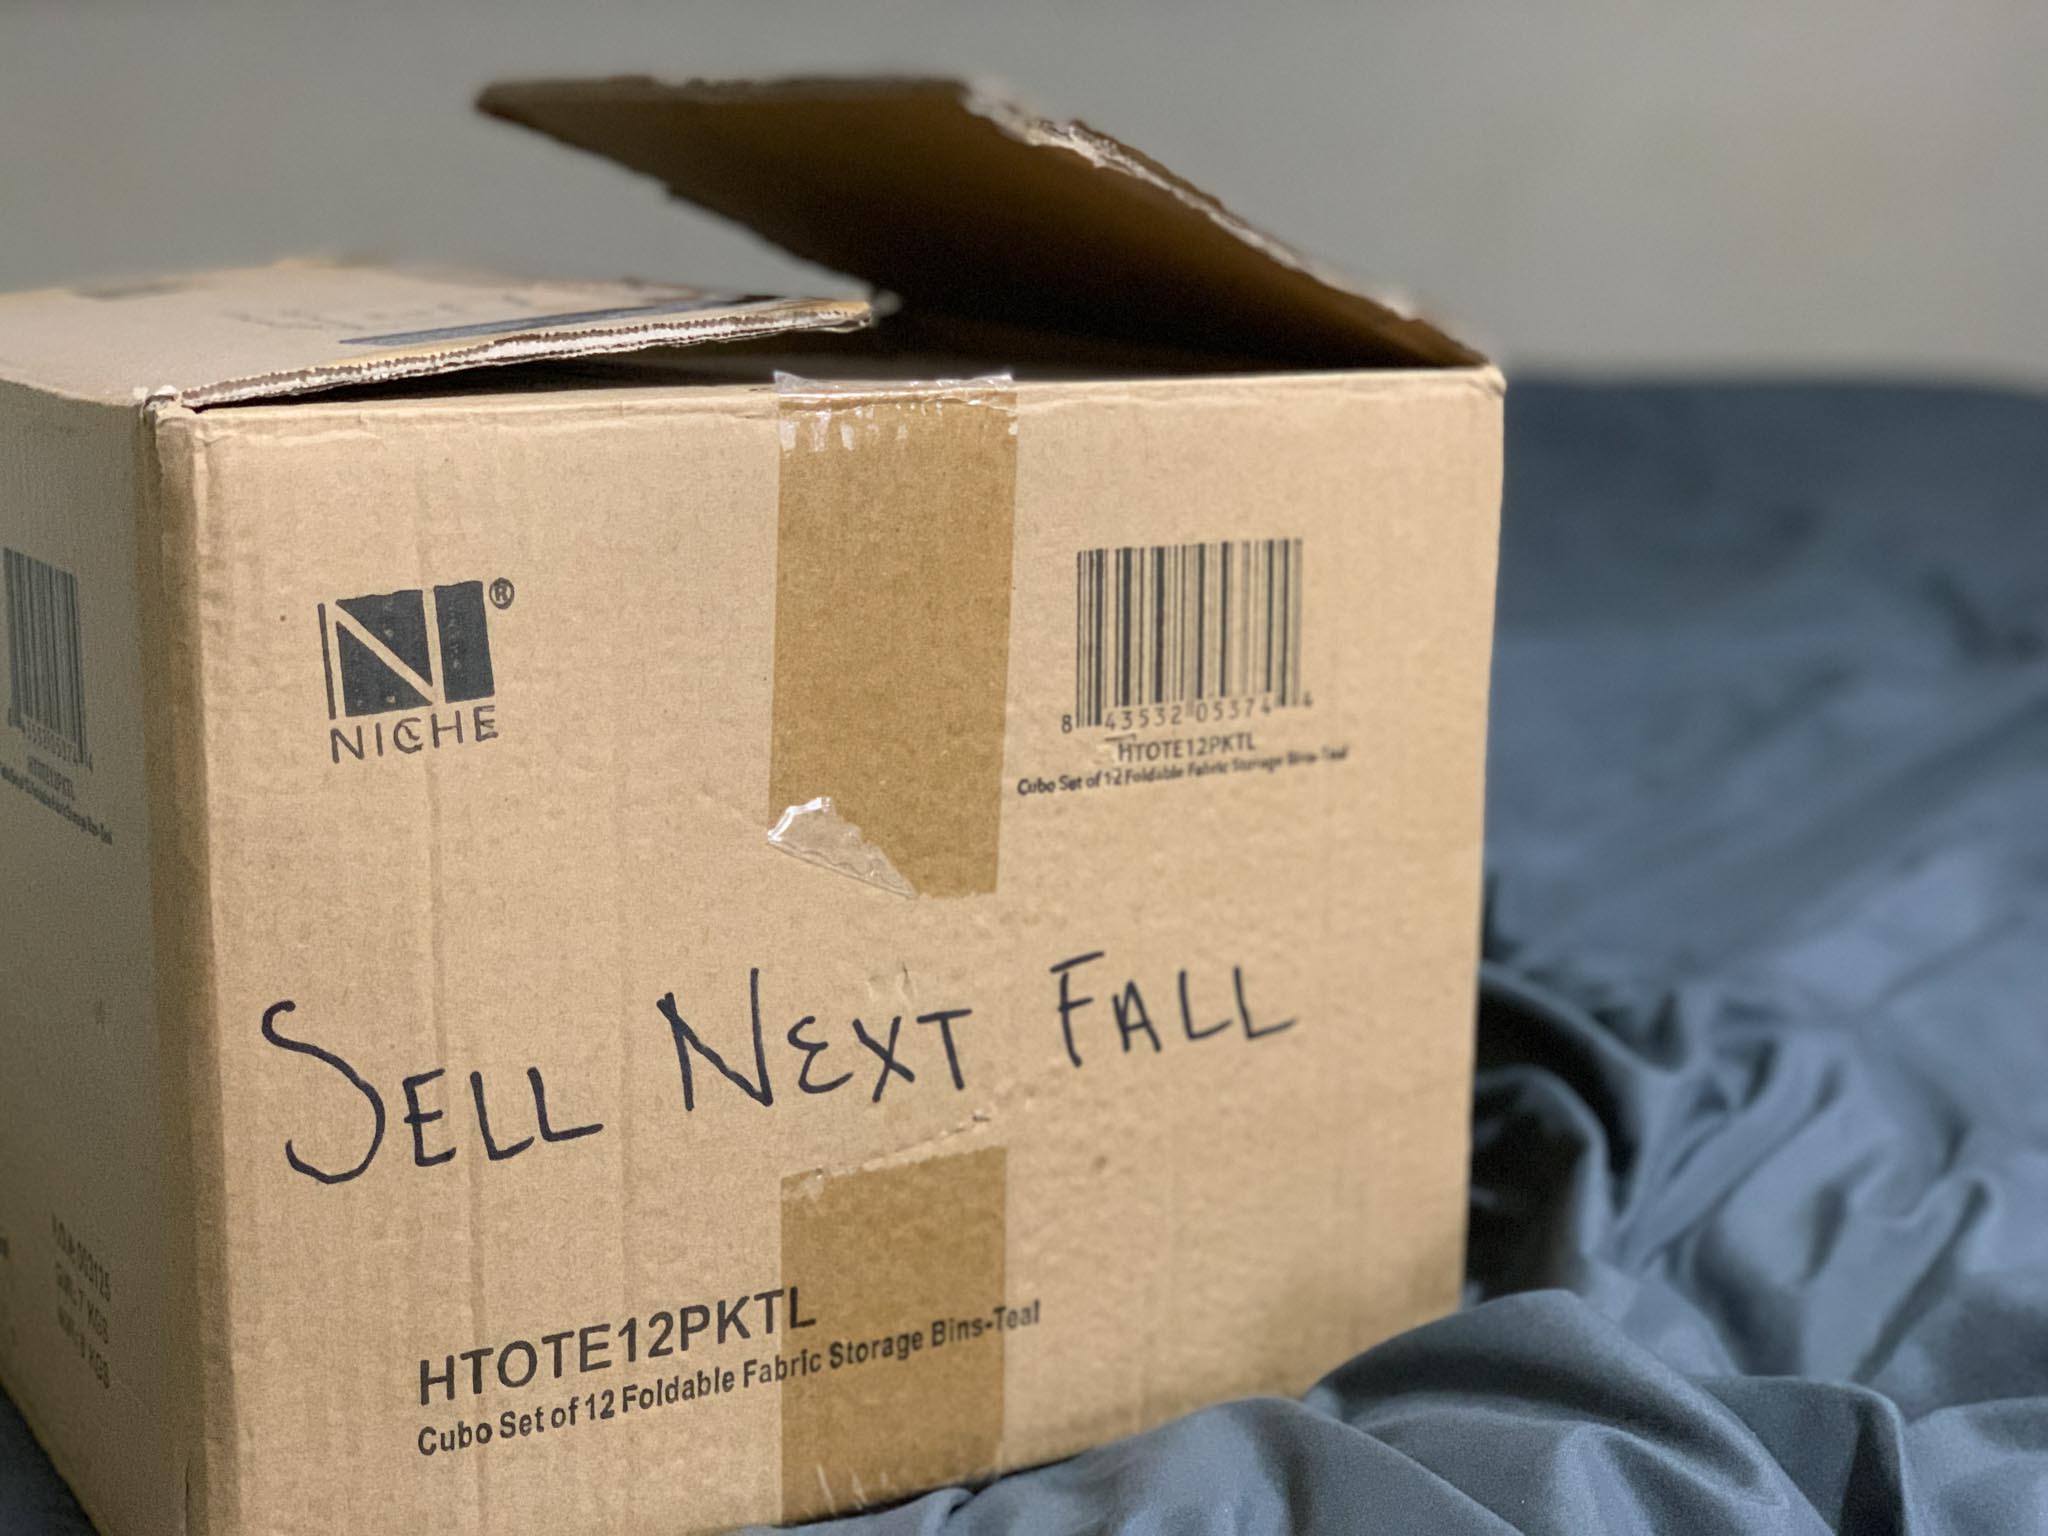 Things I Think About When I Sell My Clothing - Photo of Box labeled "Sell Next Fall"